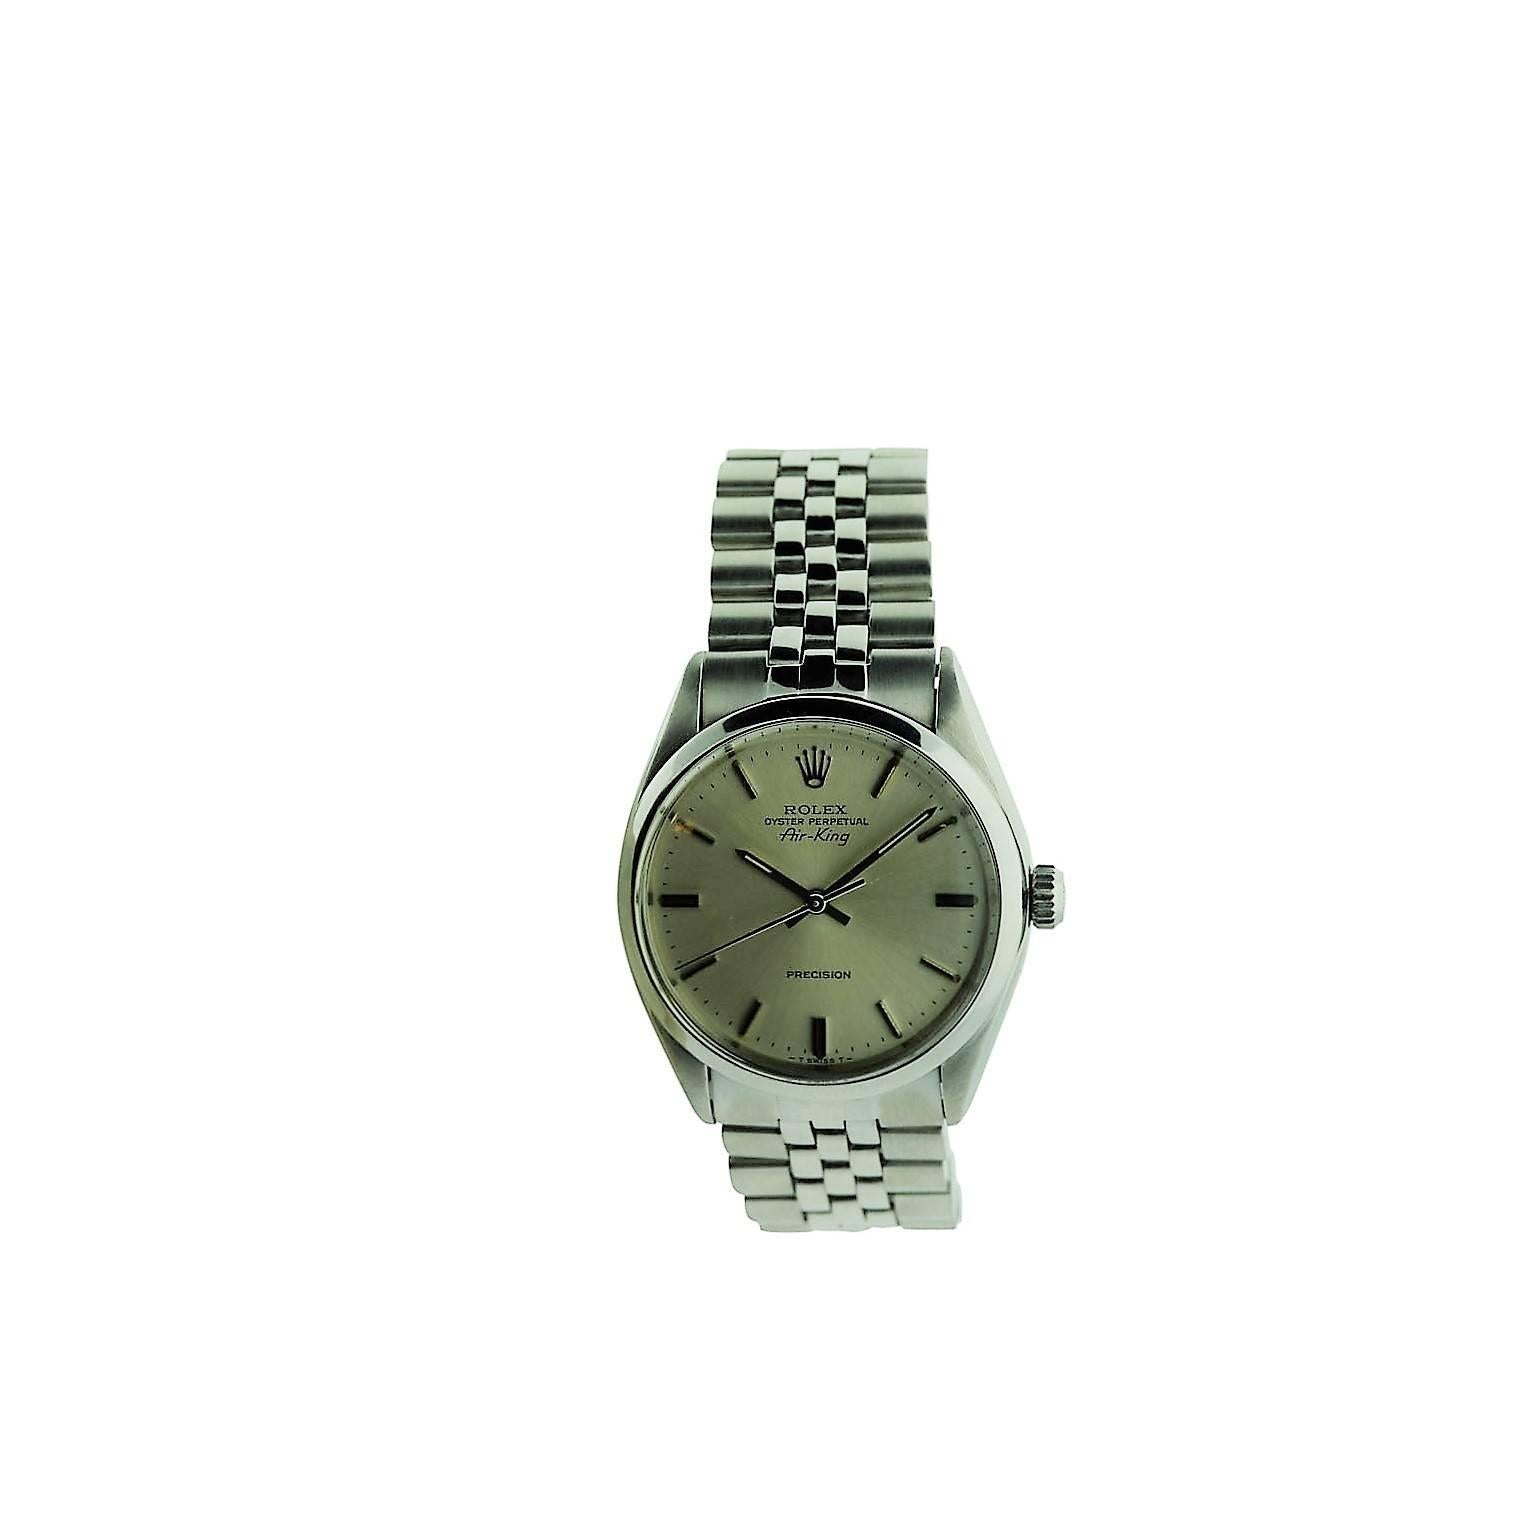 FACTORY / HOUSE: Rolex Watch Company
STYLE / REFERENCE: Oyster Perpetual / Air-King /Ref. 5500
METAL / MATERIAL: Stainless Steel 
DIMENSIONS:  40mm X 34mm
CIRCA: 1977 / 78
MOVEMENT / CALIBER: Perpetual Winding / 26 Jewels / Cal. 1570
DIAL / HANDS: